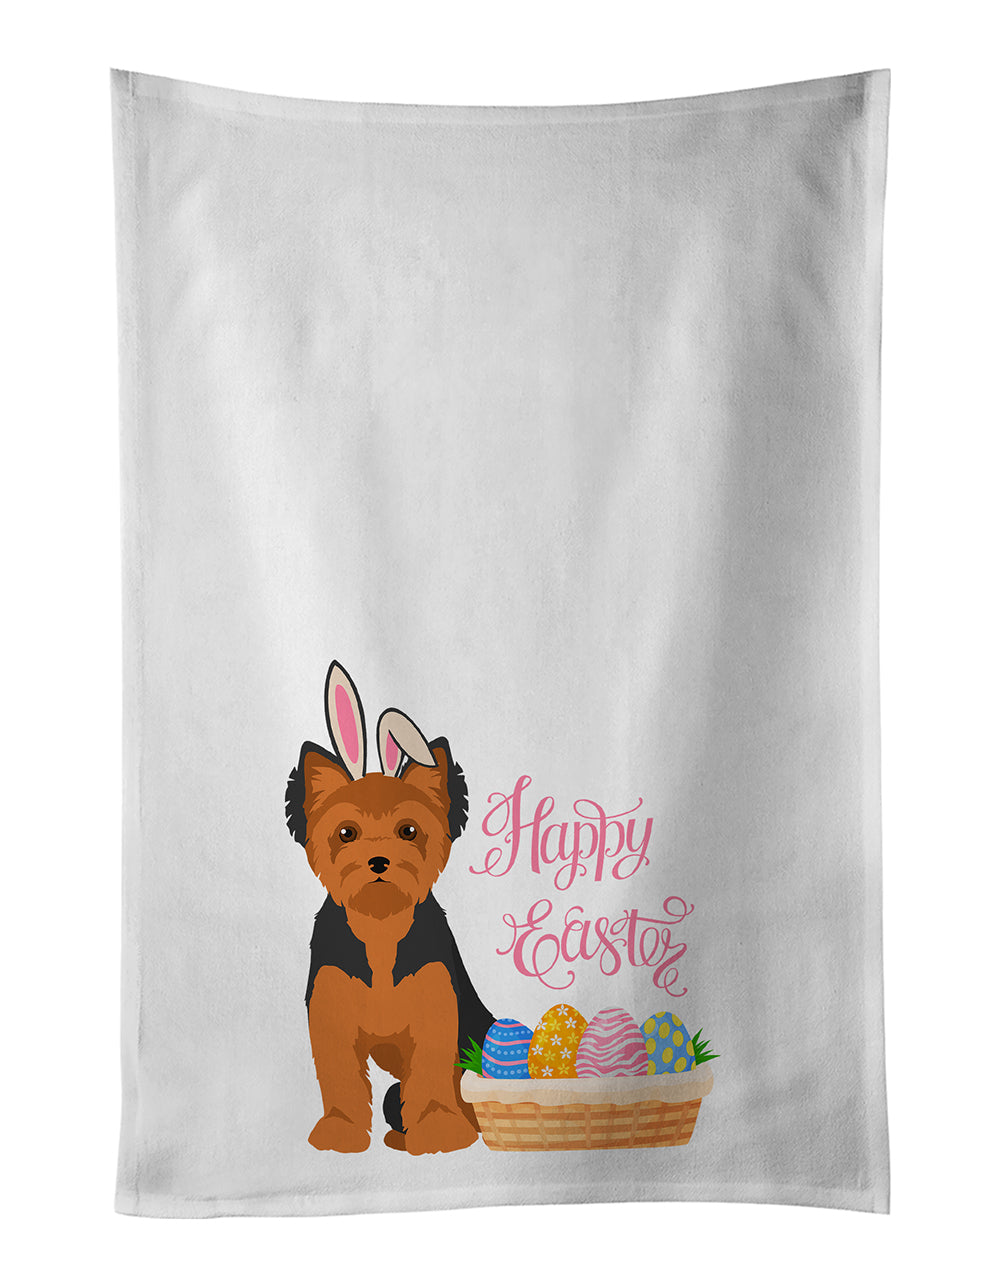 Buy this Black and Tan Puppy Cut Yorkshire Terrier Easter White Kitchen Towel Set of 2 Dish Towels